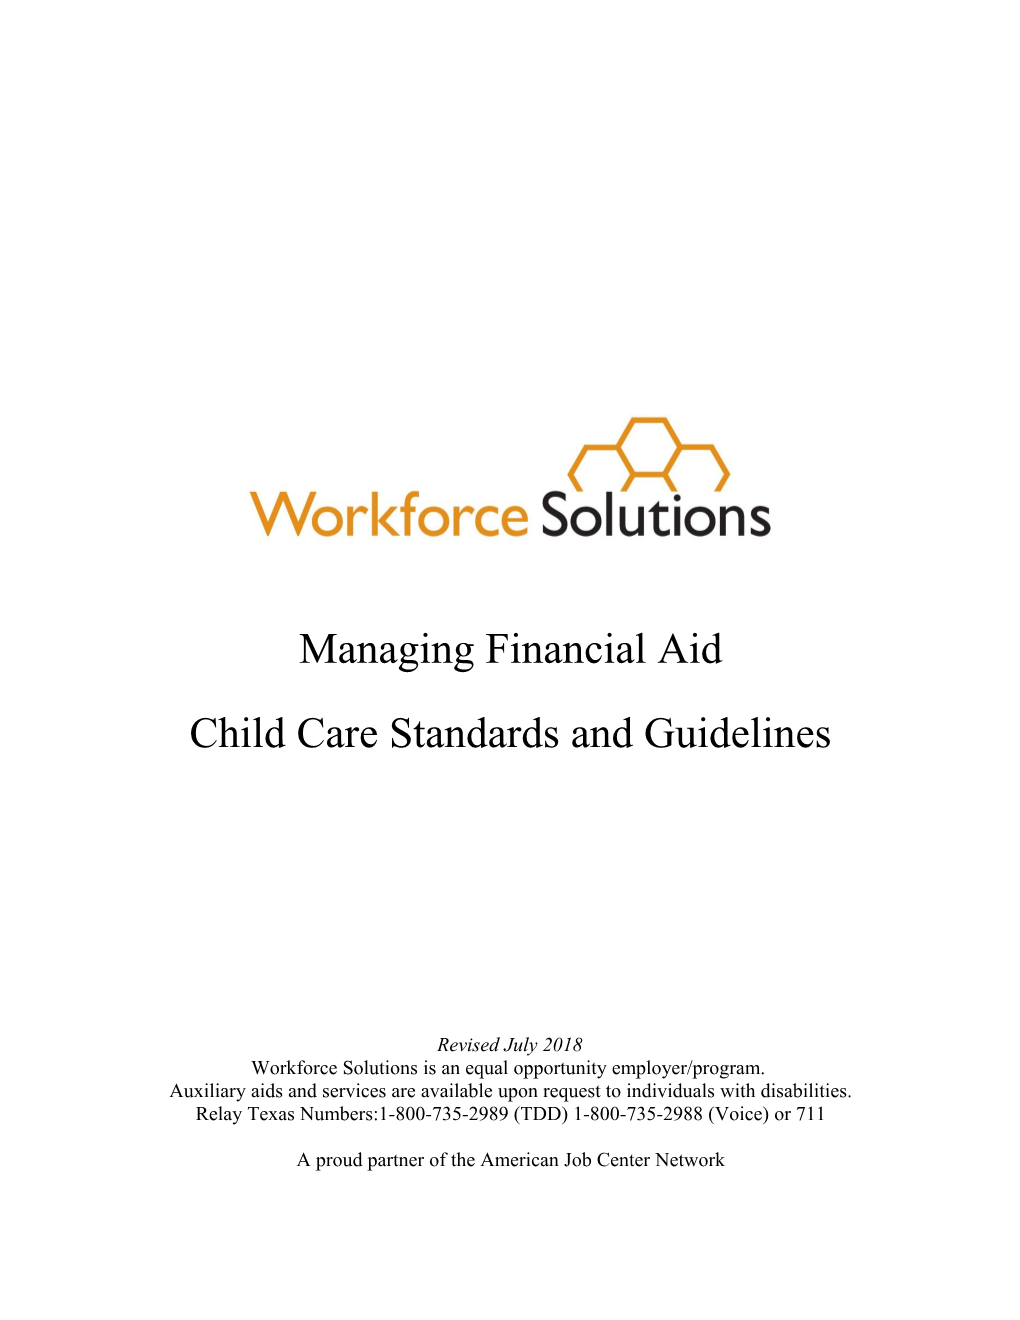 Child Care Standards & Guidelines